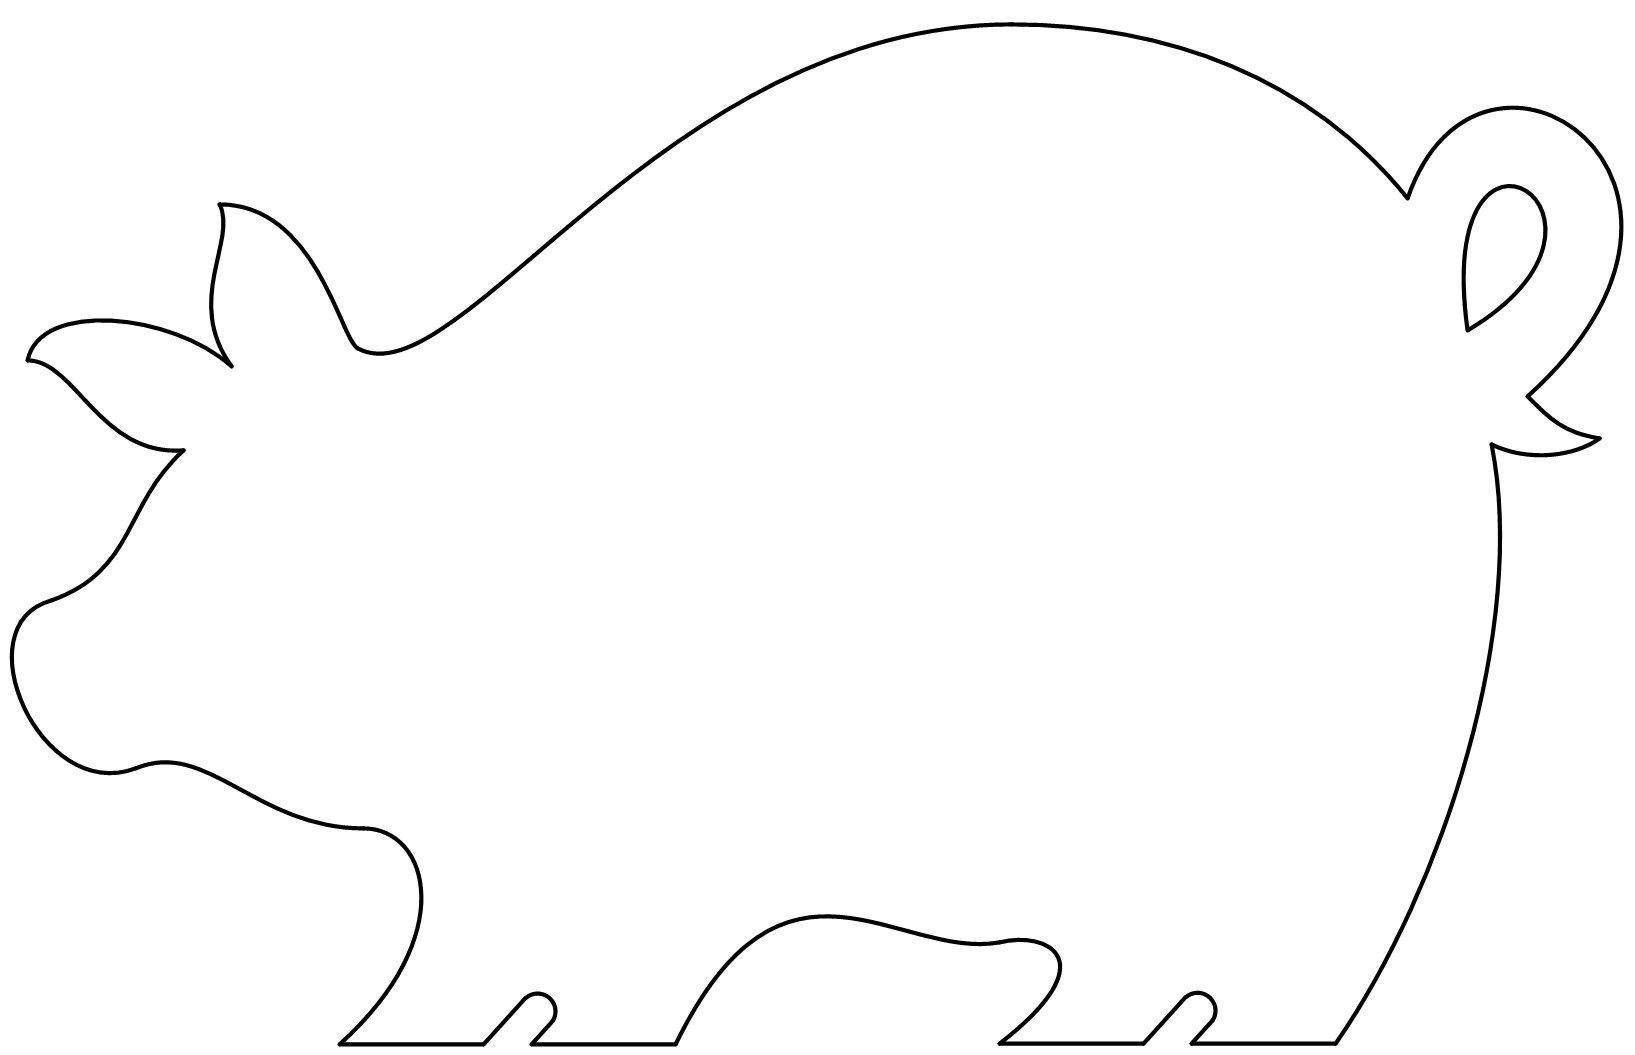 Coloring Outline, pig, pig. Category The outline of a pig to cut. Tags:  .